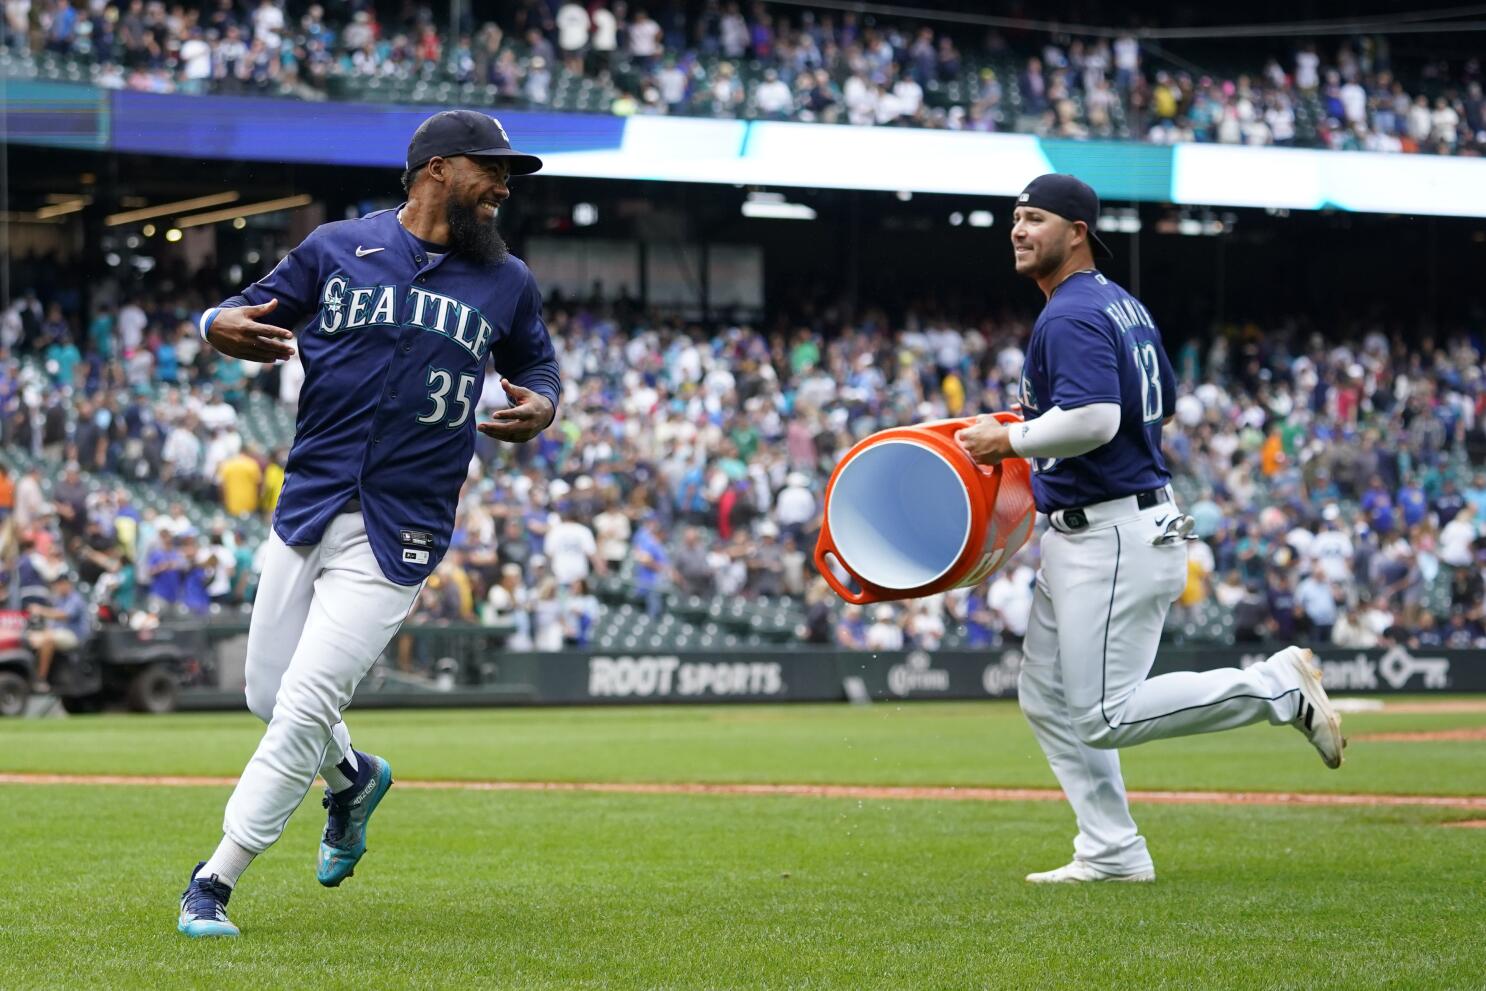 Five keys to Seattle Mariners becoming the hottest team in MLB